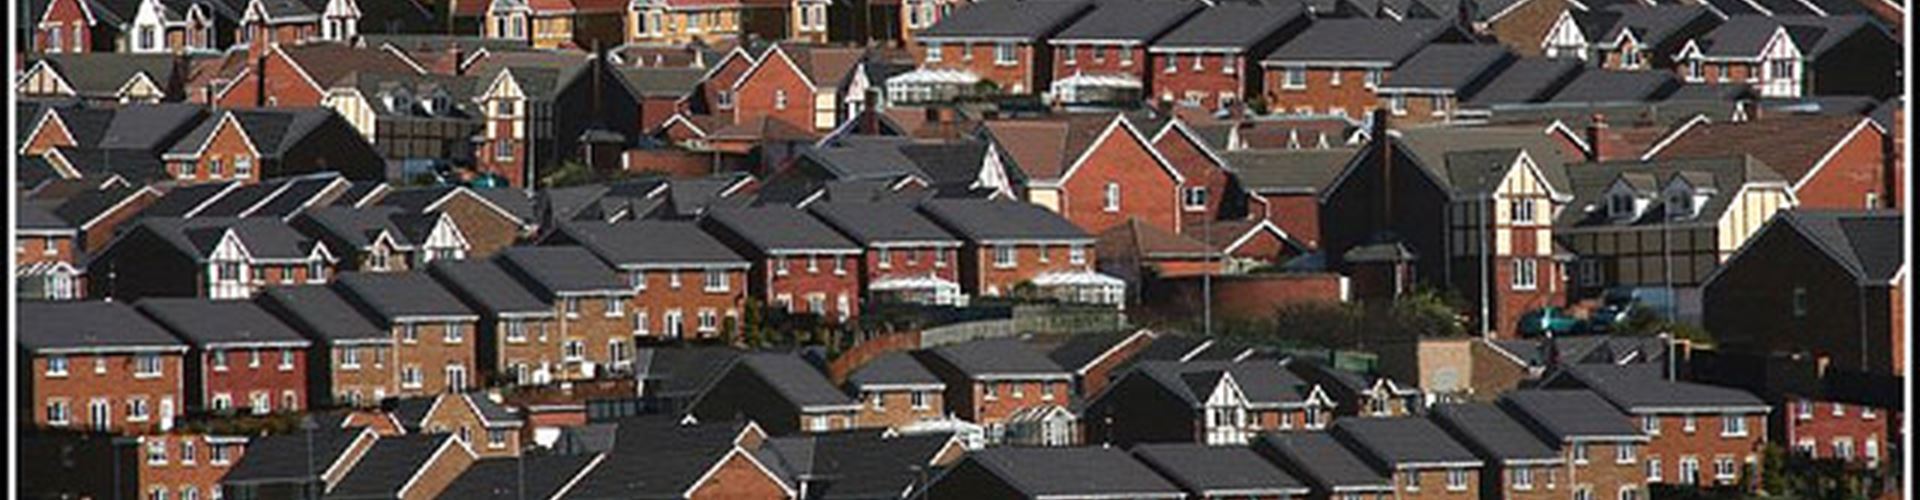 Where Is The Troubled UK Housing Market Headed?